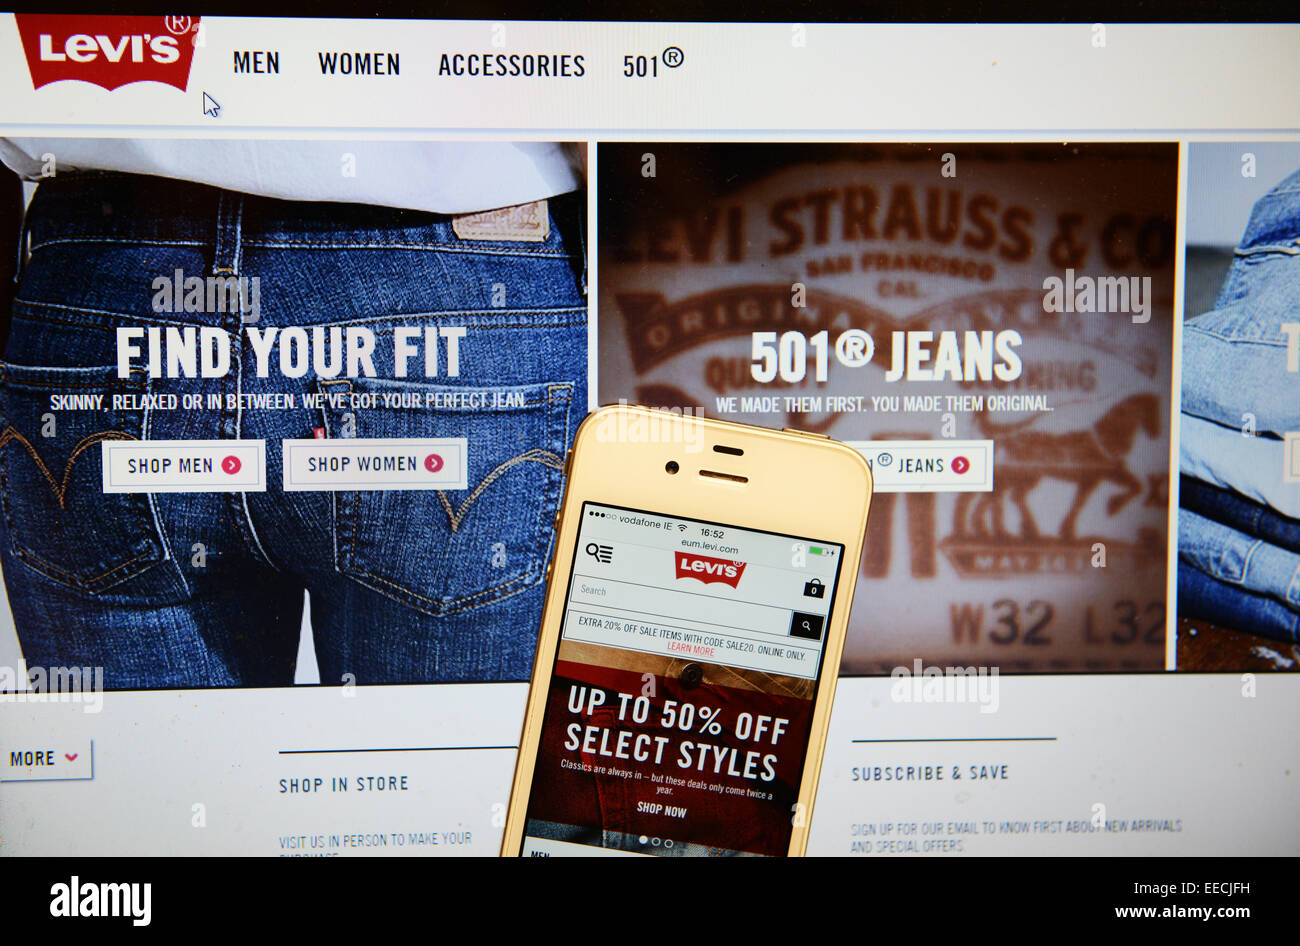 Levis Website and IPhone Stock Photo - Alamy